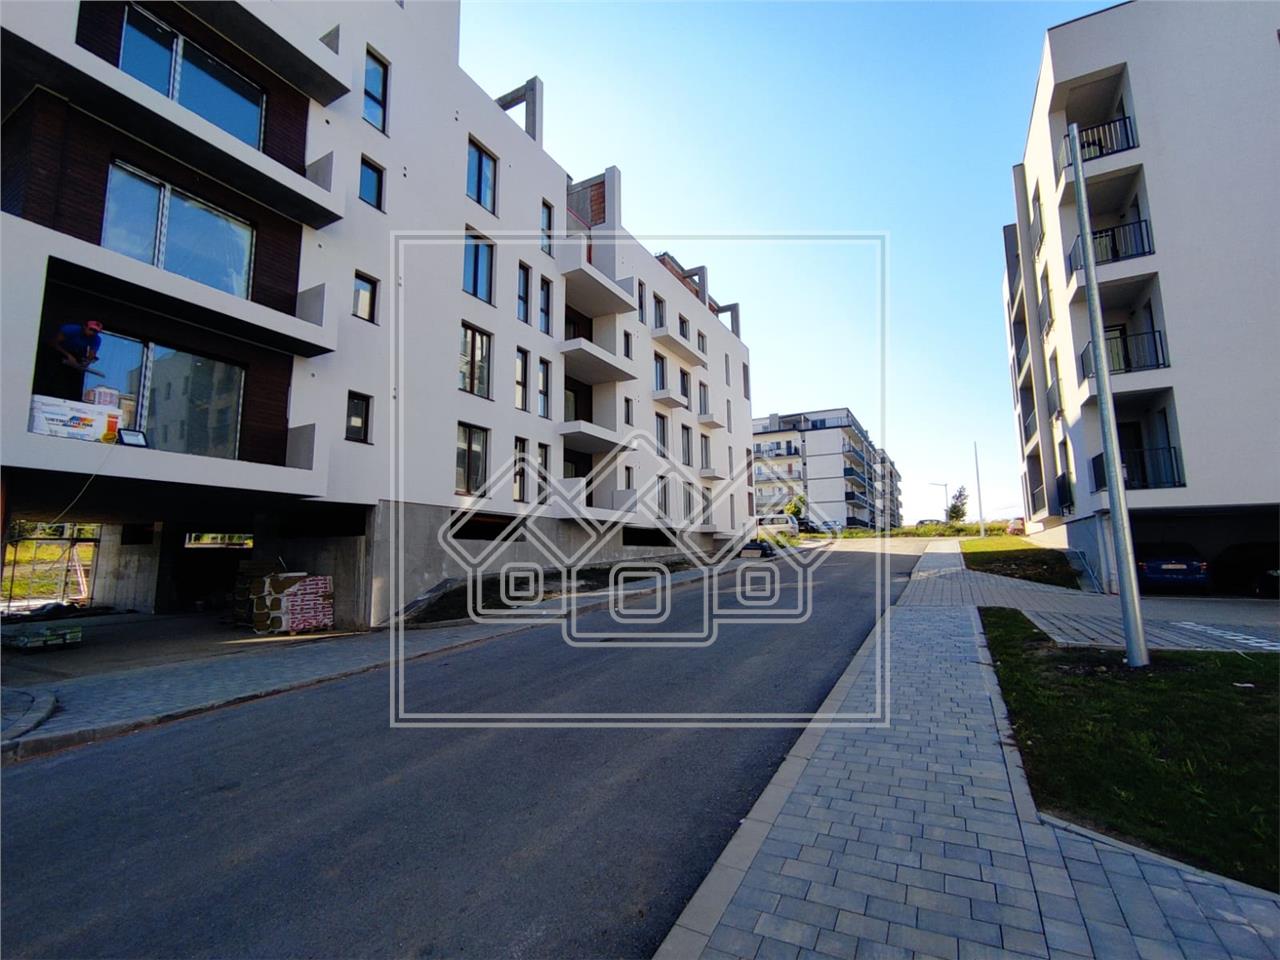 Apartment for sale in Sibiu - 2 terraces - Neppendorf Residence